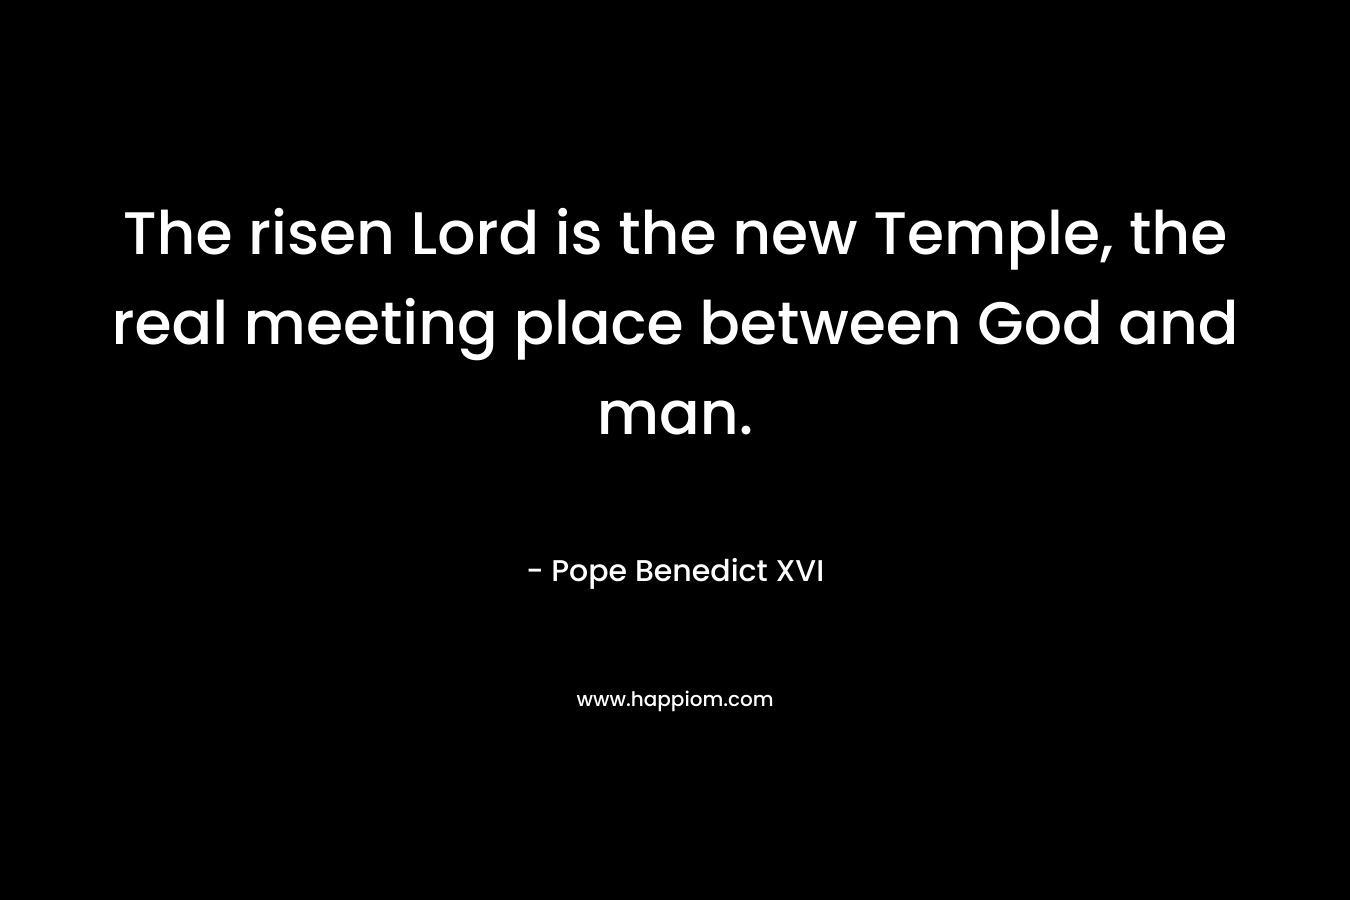 The risen Lord is the new Temple, the real meeting place between God and man. – Pope Benedict XVI